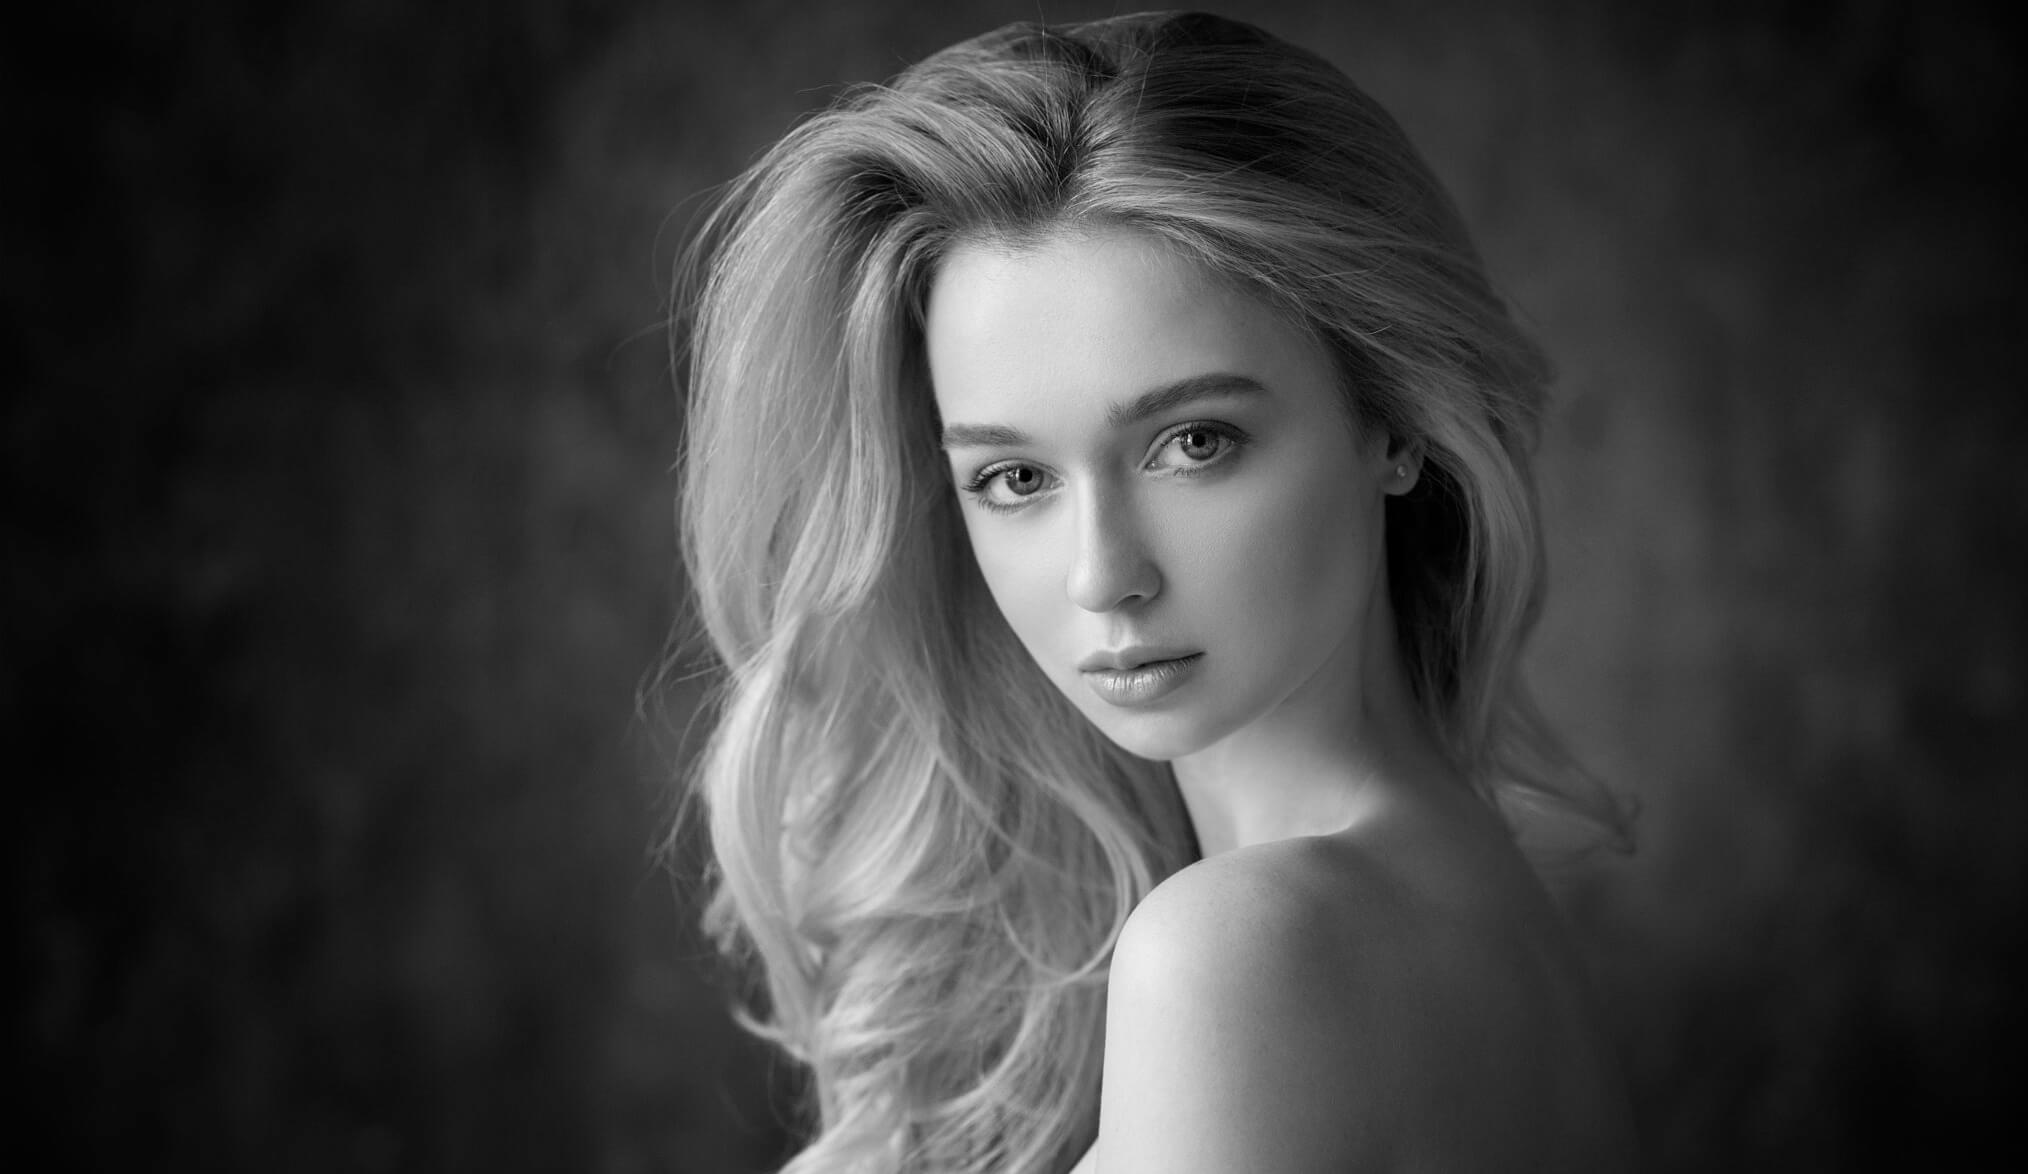 Black and White Portrait Photography